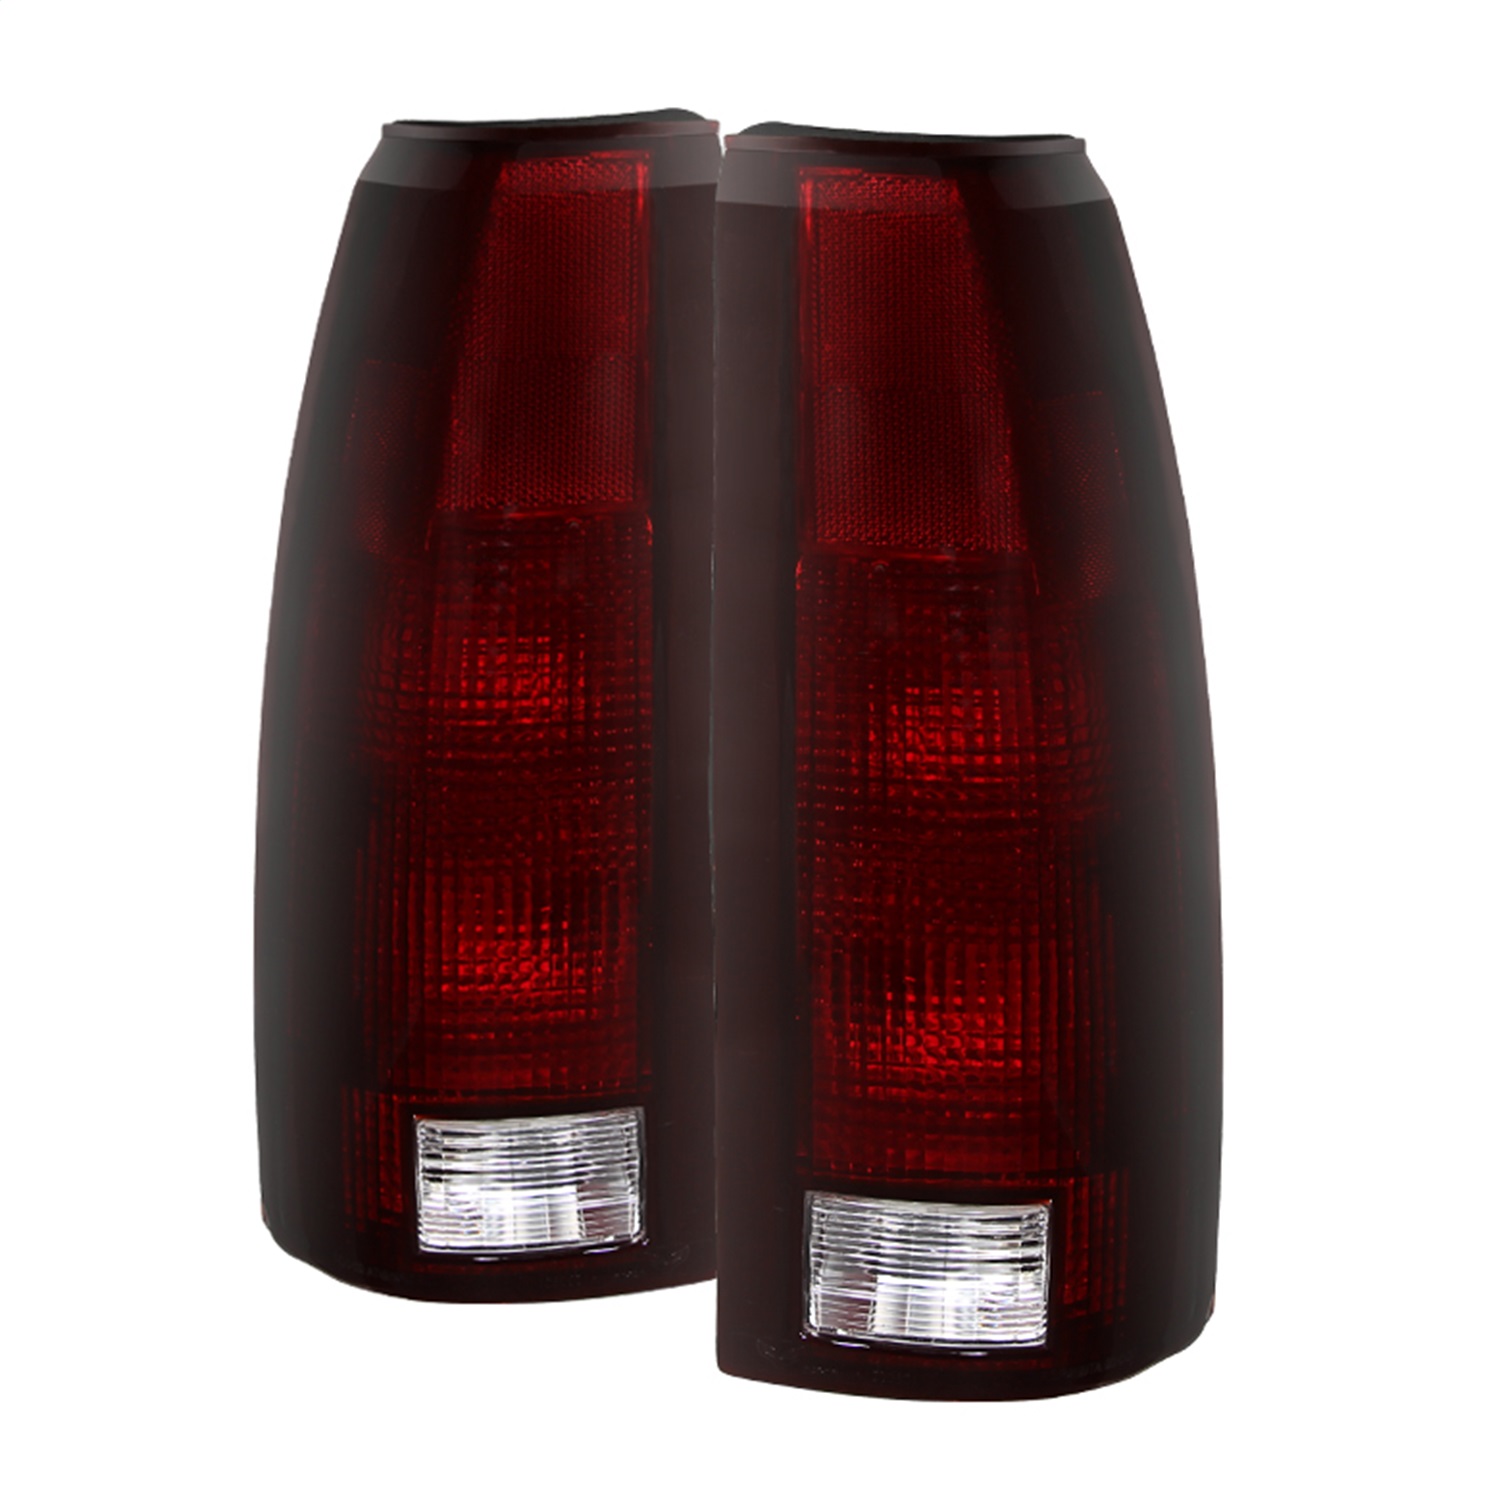 Spyder Auto 9028786 XTune LED Tail Lights